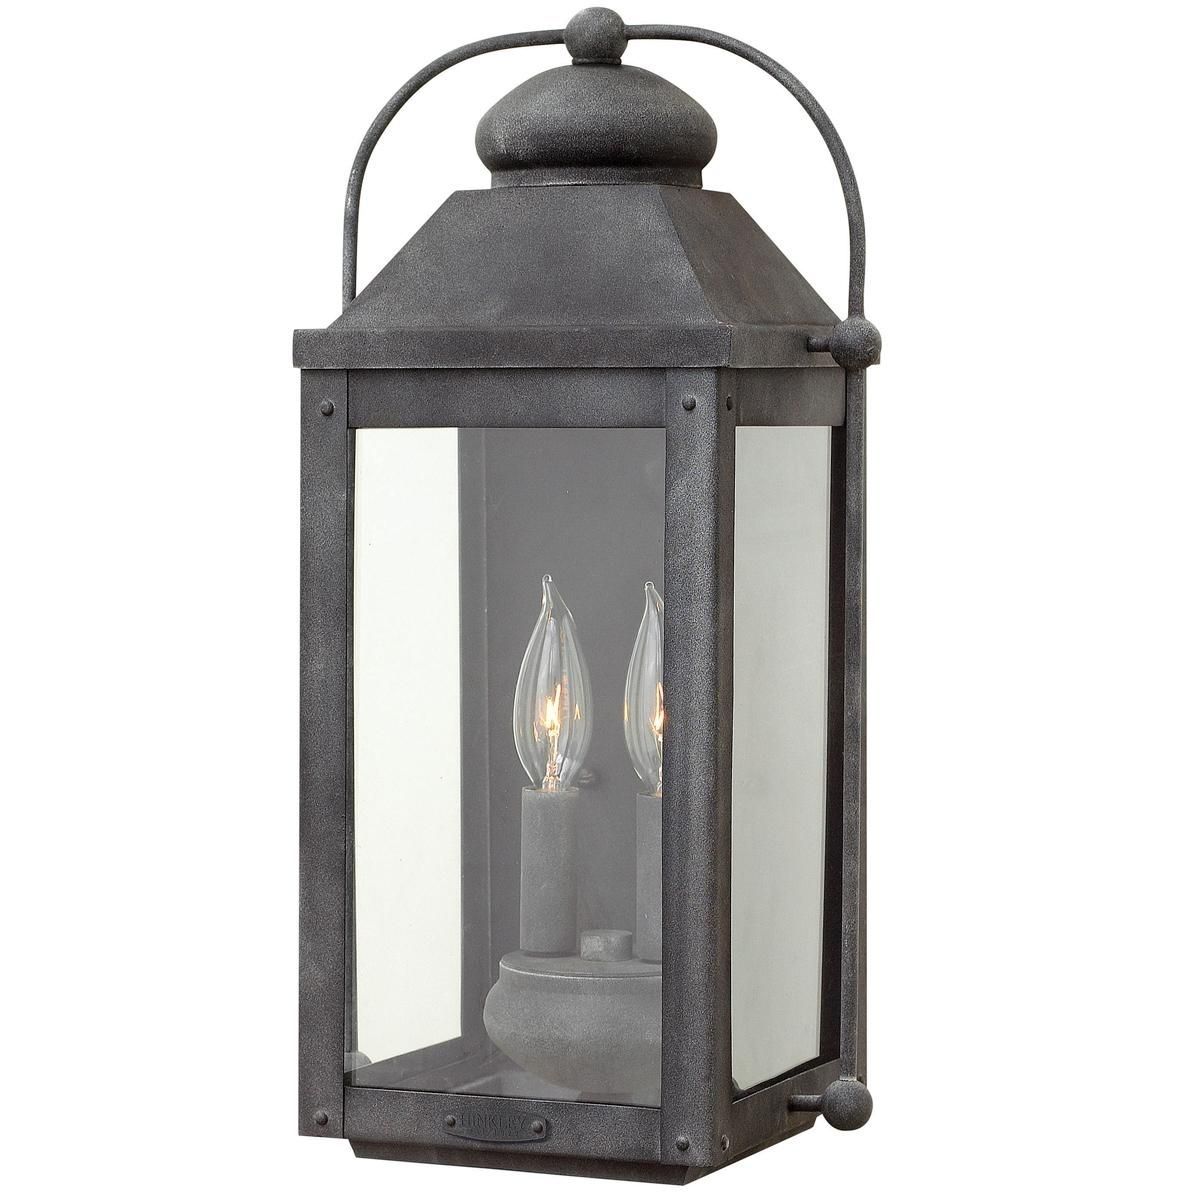 Nostalgic Arched Carriage Outdoor Light – Small | Lights, Rambler With Outdoor Wall Lighting At Houzz (View 10 of 15)